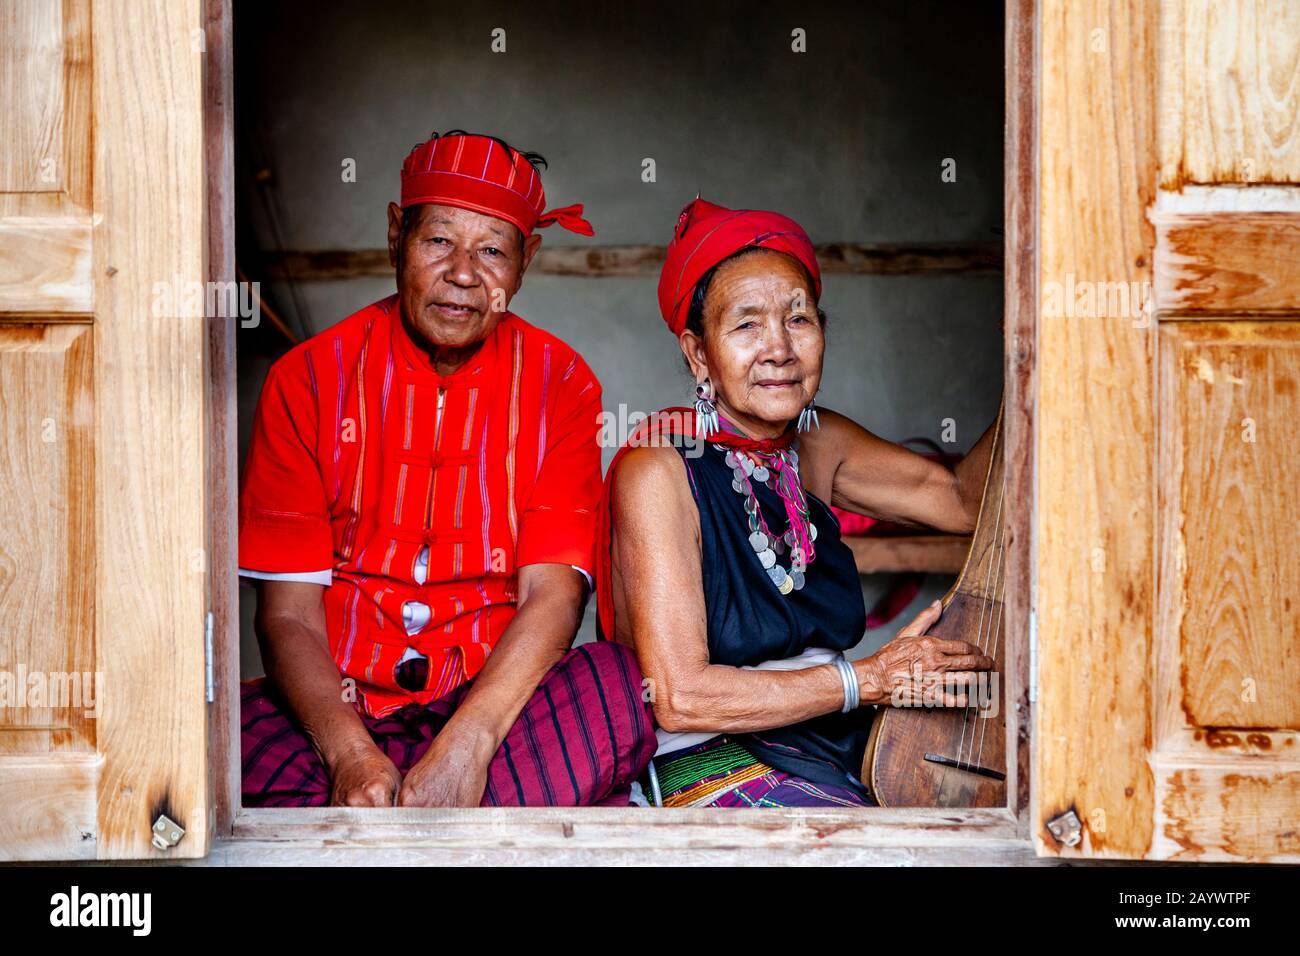 A Senior Couple From The Kayah Ethnic Group Inside Their Home, Hta Nee La Leh Village, Loikaw, Kayah State, Myanmar. Stock Photo